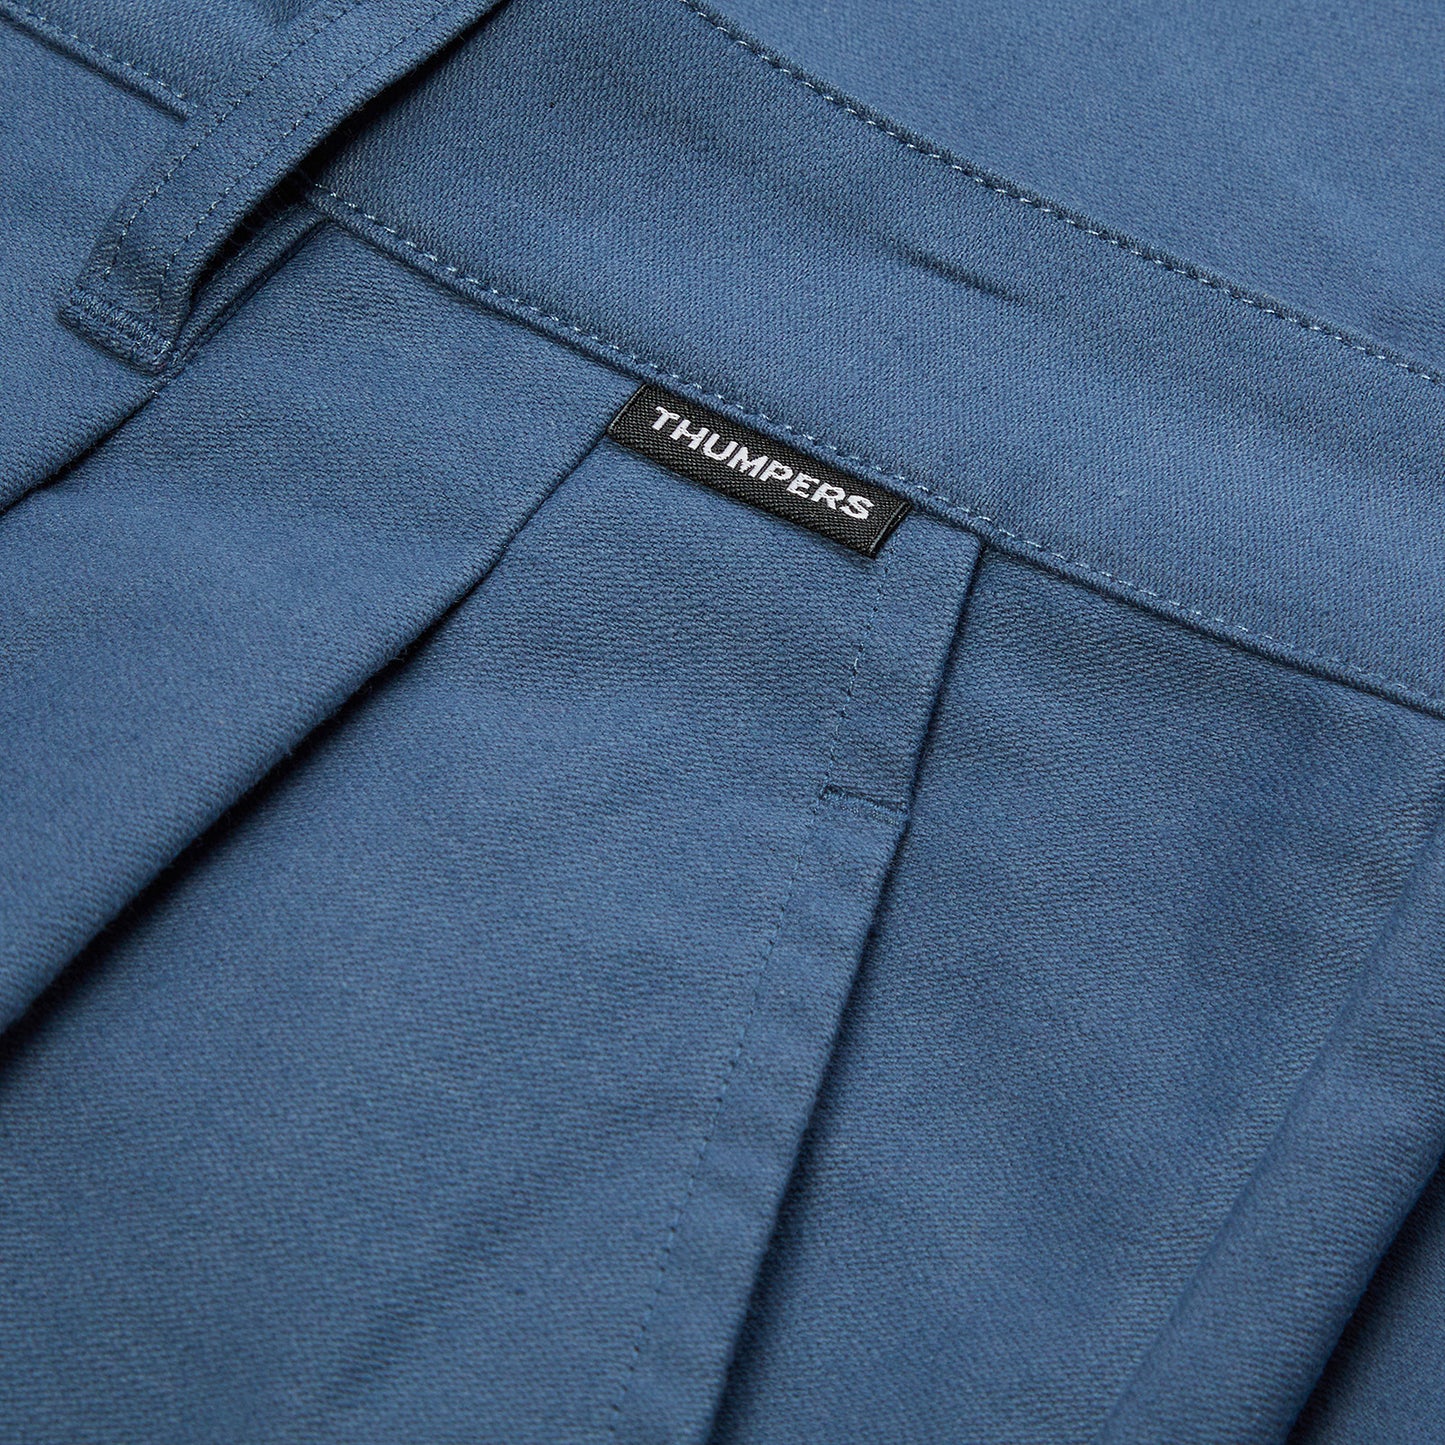 Thumpers Tuck Pants (Blue Grey)